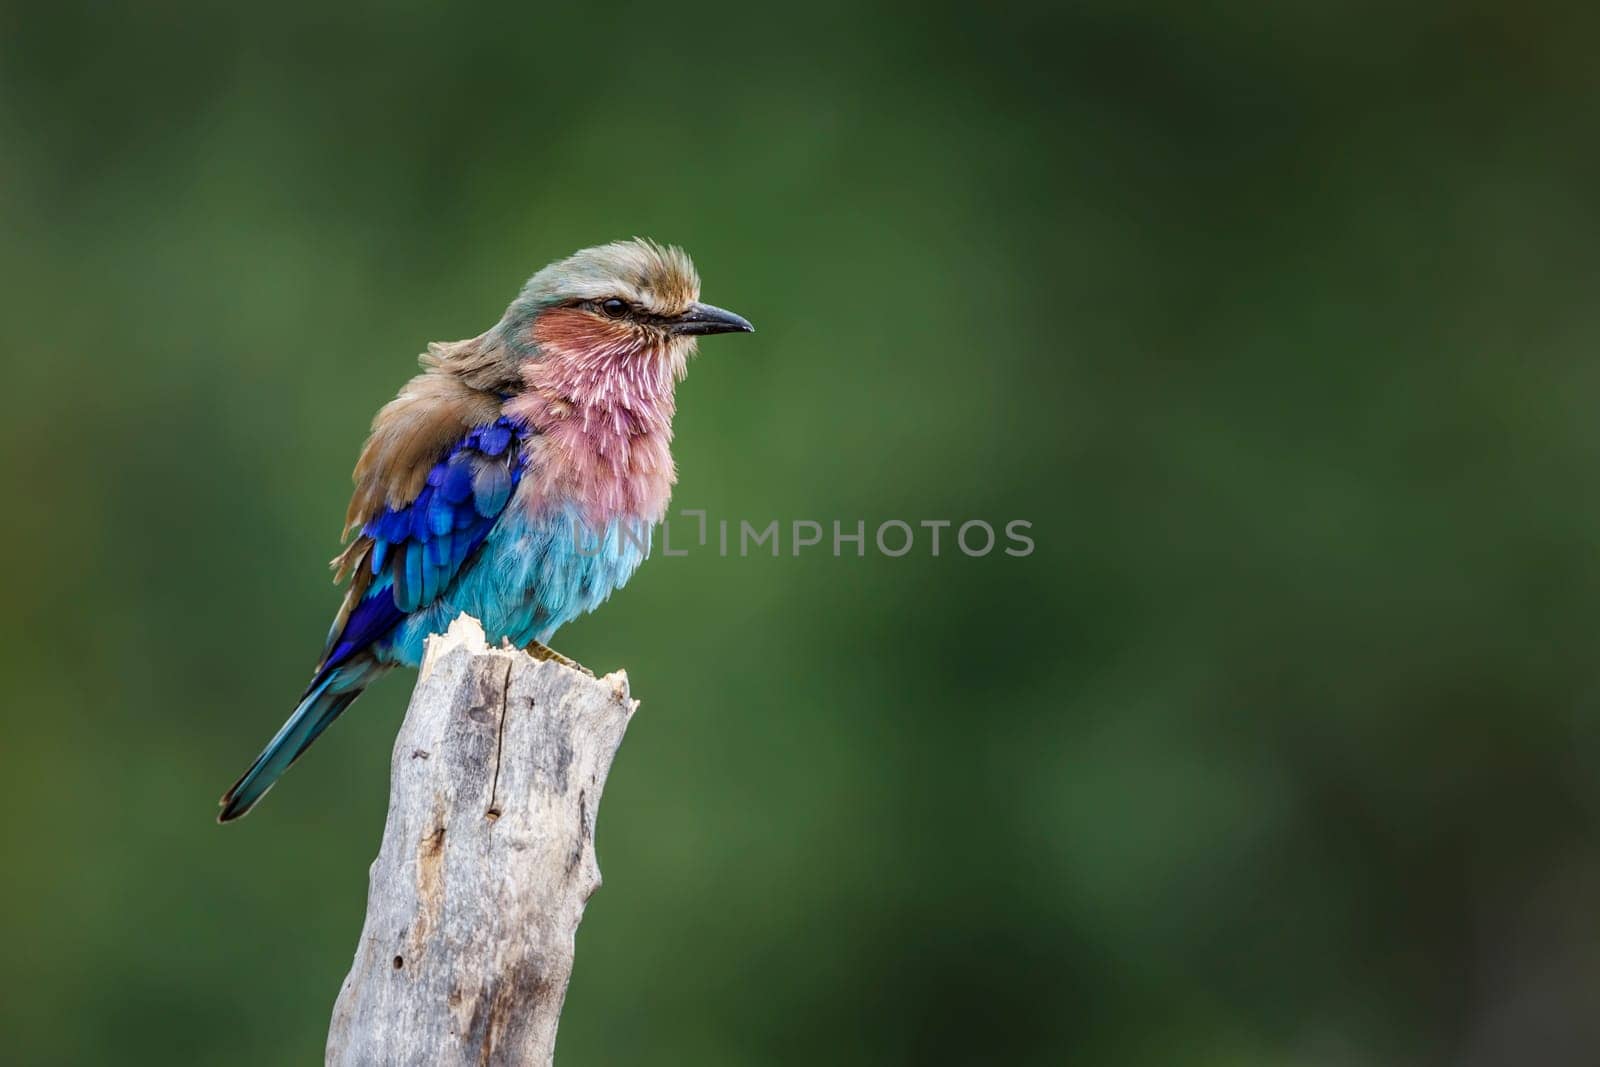 Lilac breasted roller standing on a trunk isolated in natural background in Kruger National park, South Africa ; Specie Coracias caudatus family of Coraciidae